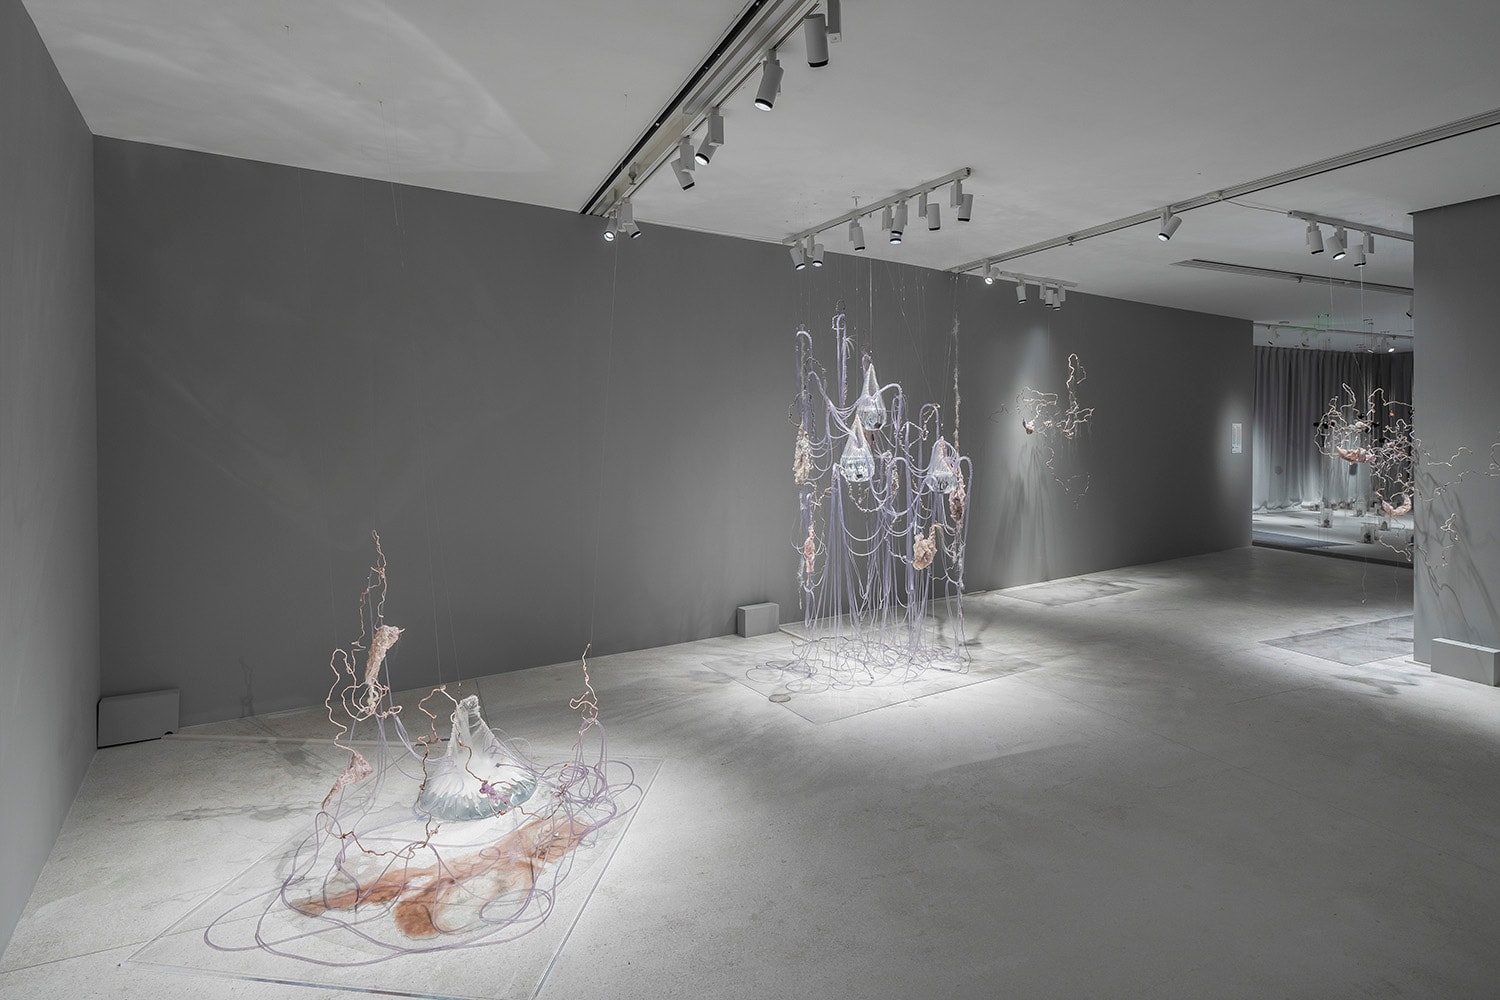 UCCA Edge 全新群展「集光片羽 The Pieces I Am」即将开幕